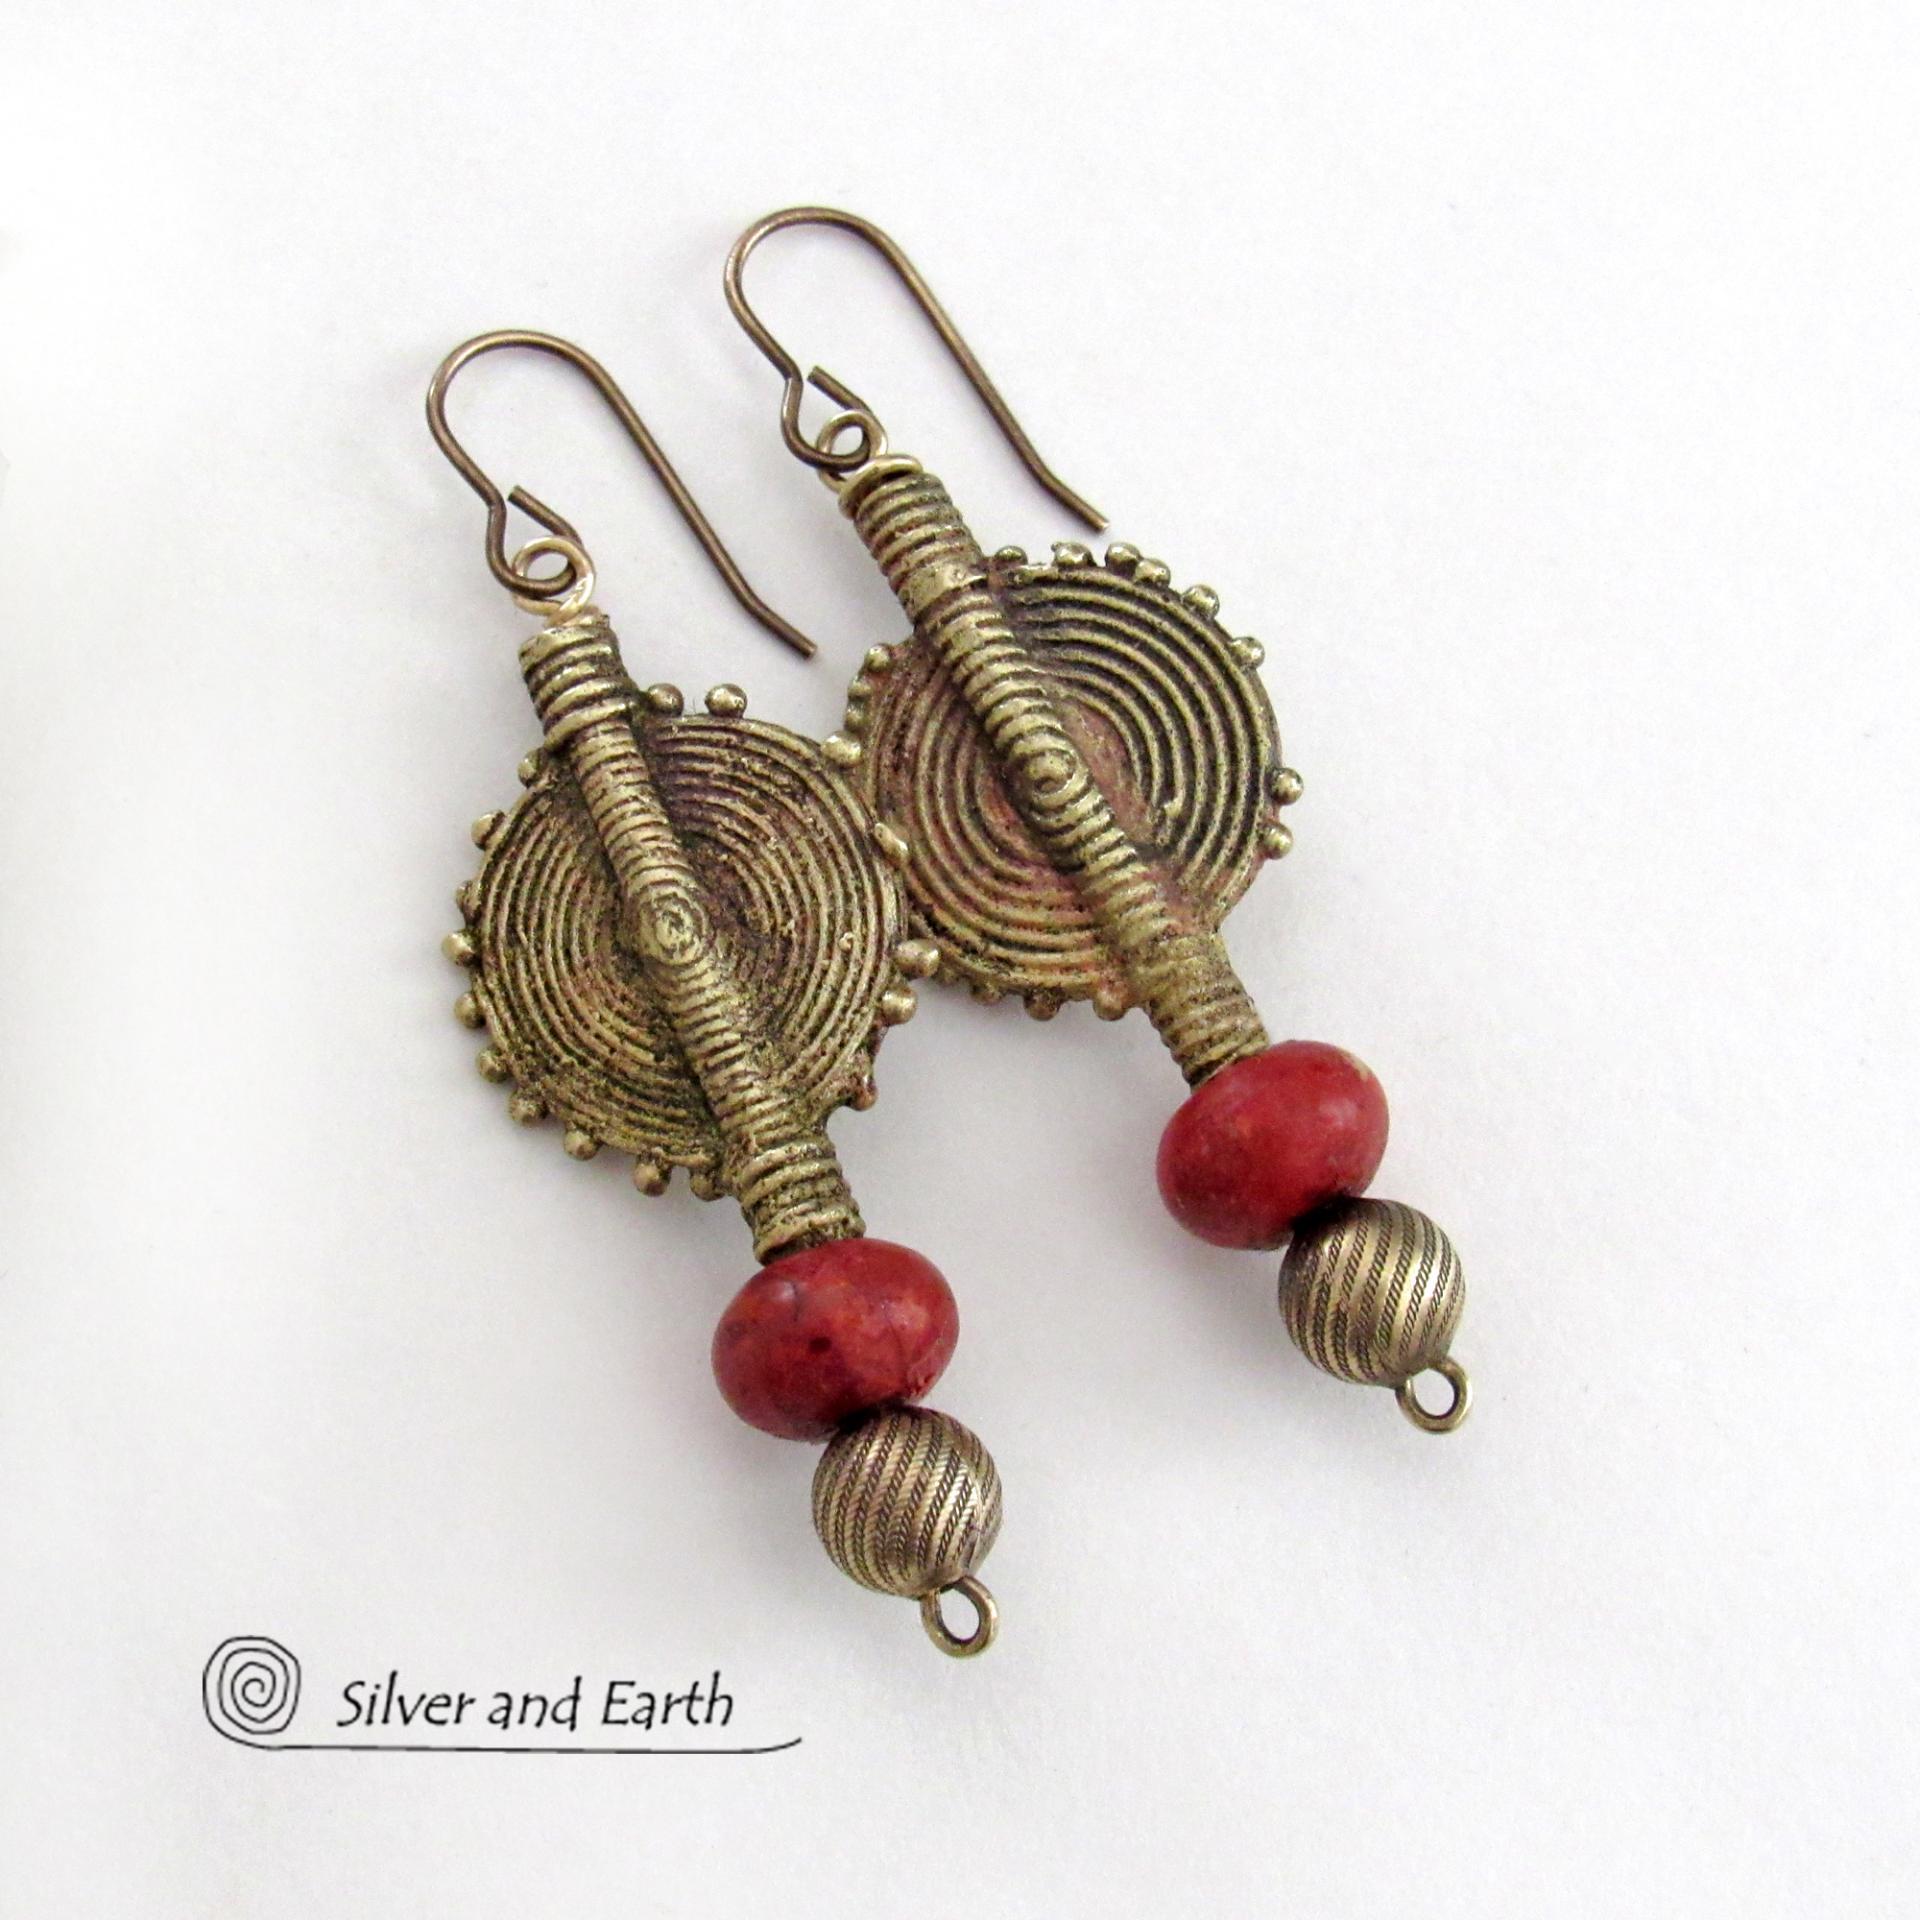 https://silverandearth.com/sites/silverandearth.indiemade.com/files/styles/product_image/public/products/african%20brass%20sundial%20earrings%2C%20coral%202.jpg?itok=juT46ked